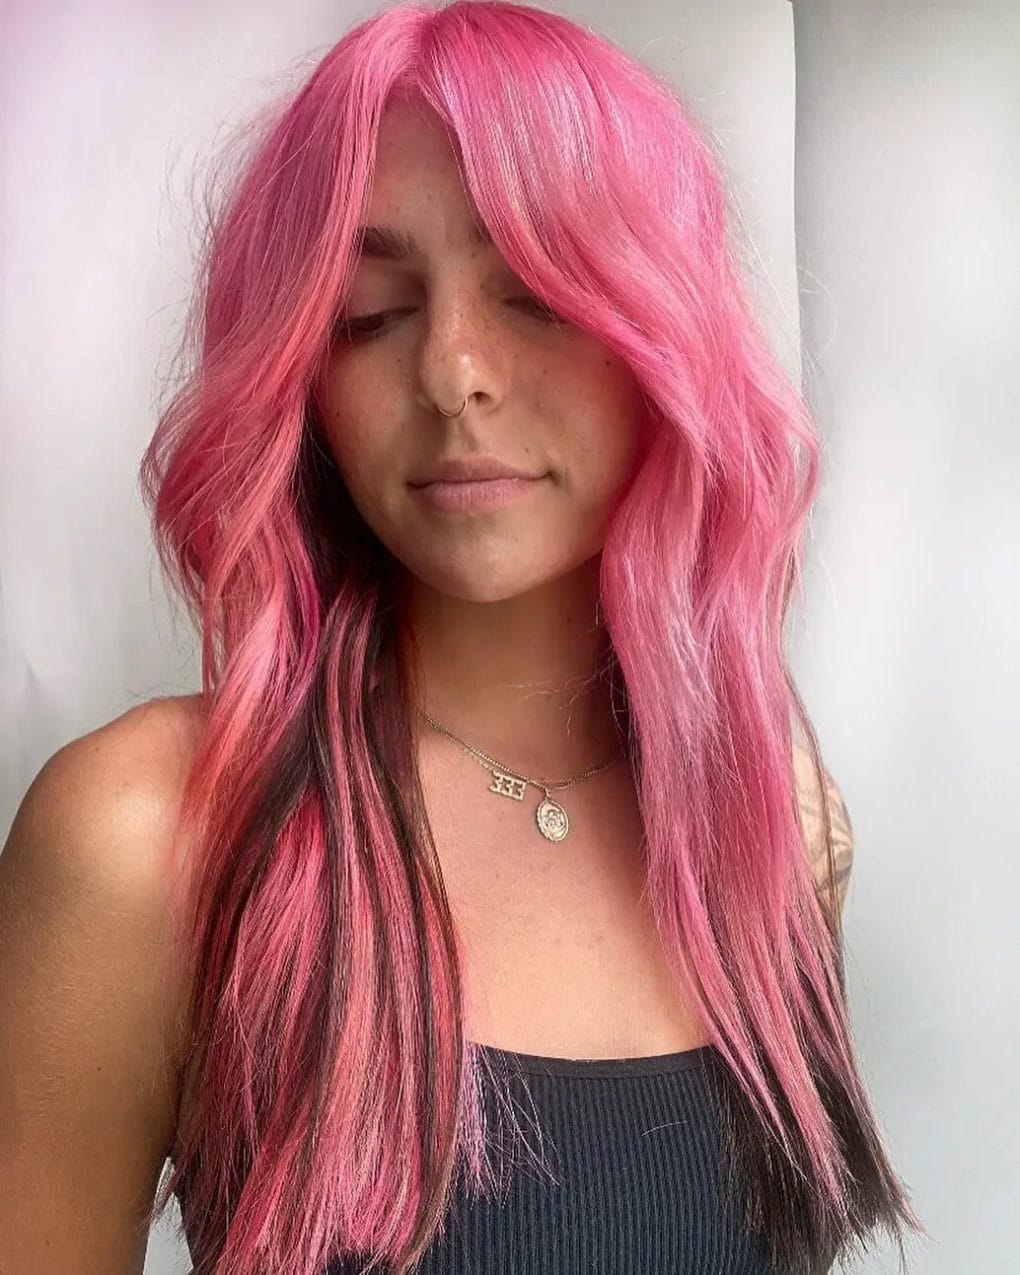 Vivid pink cotton candy dream with dark tips in long waves.